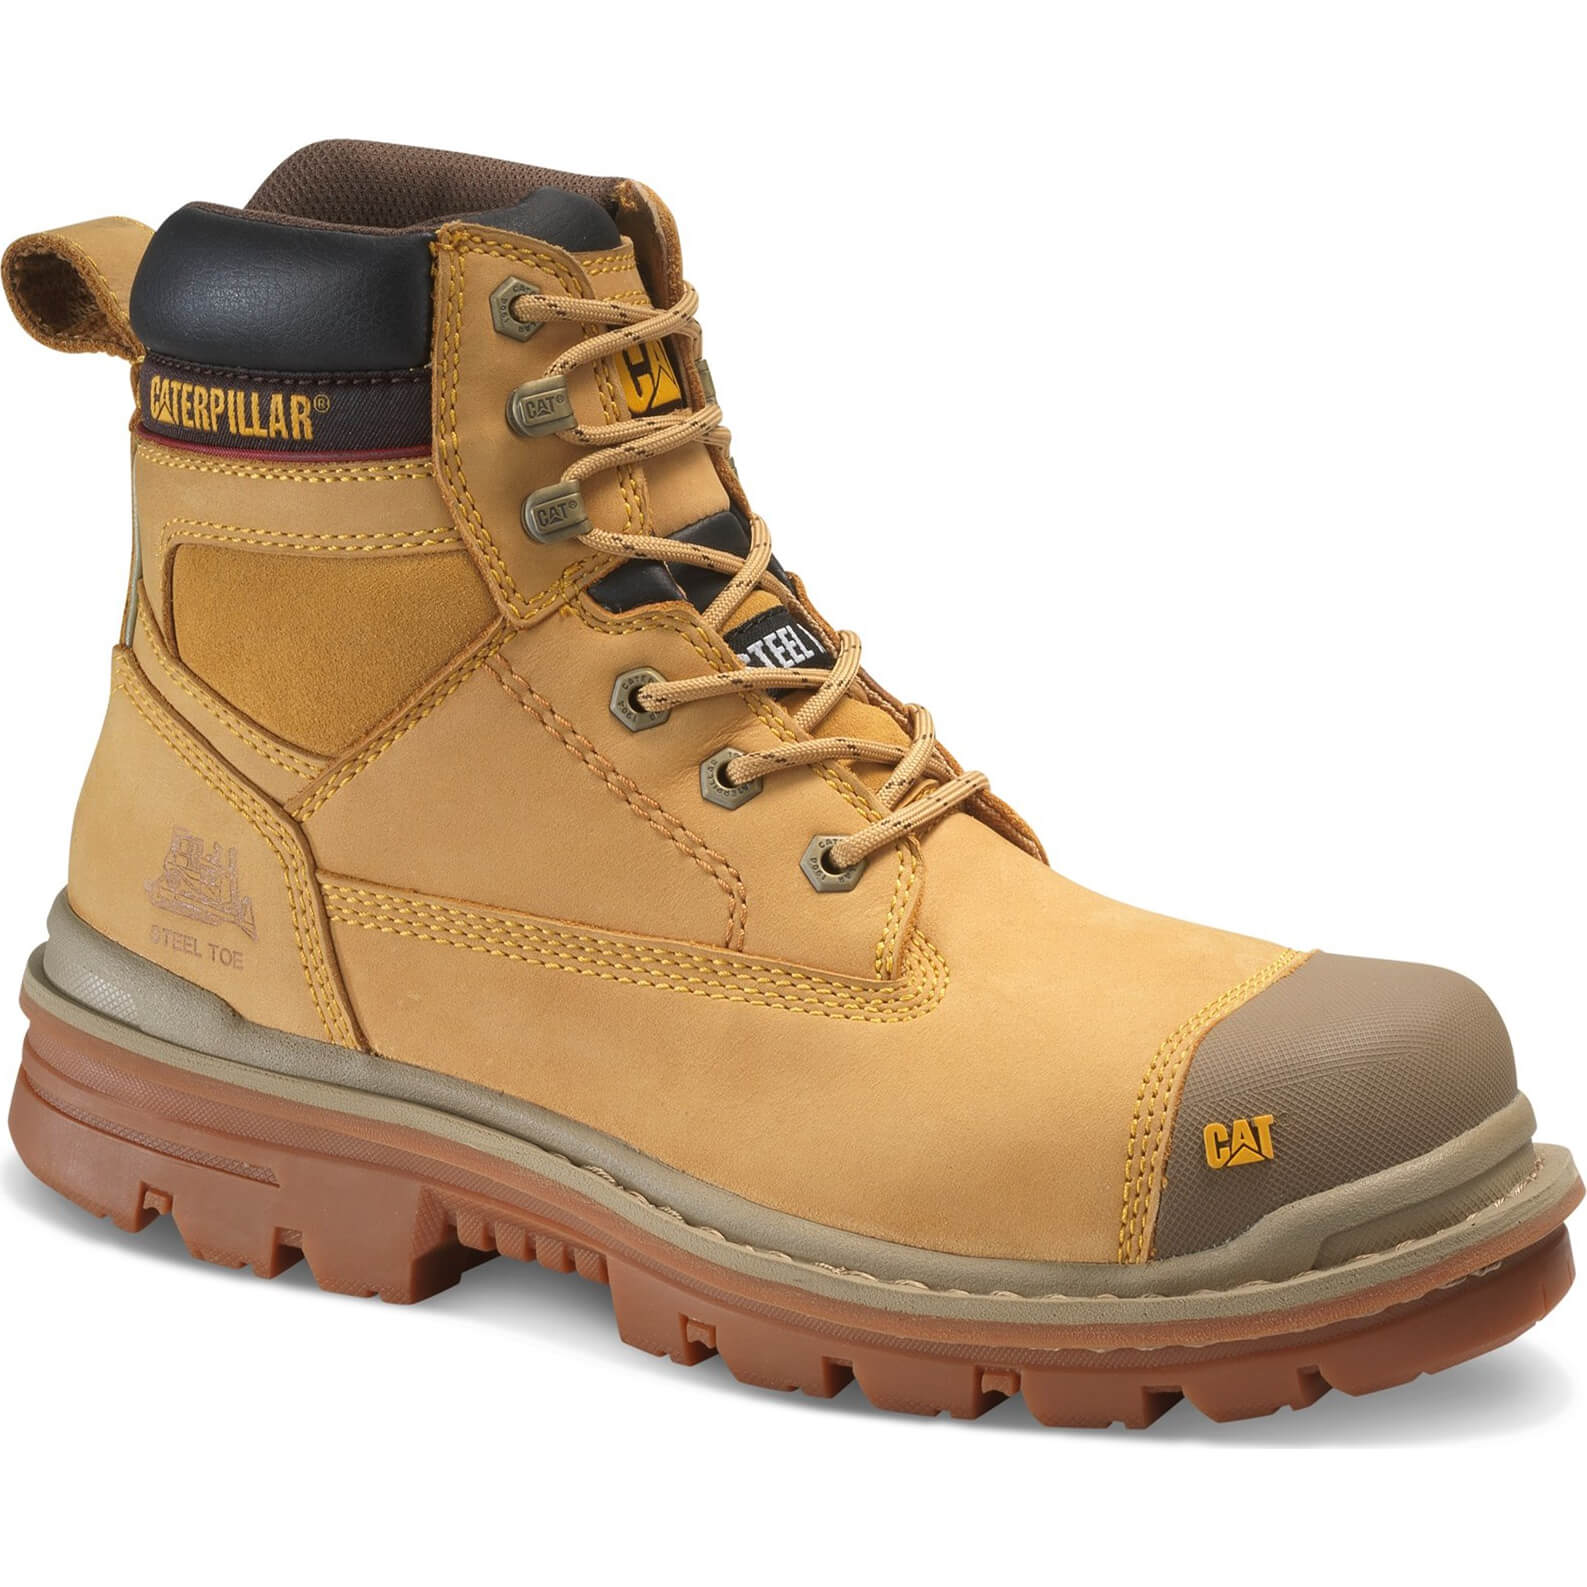 Image of Caterpillar Mens Gravel Safety Boots Honey Size 7